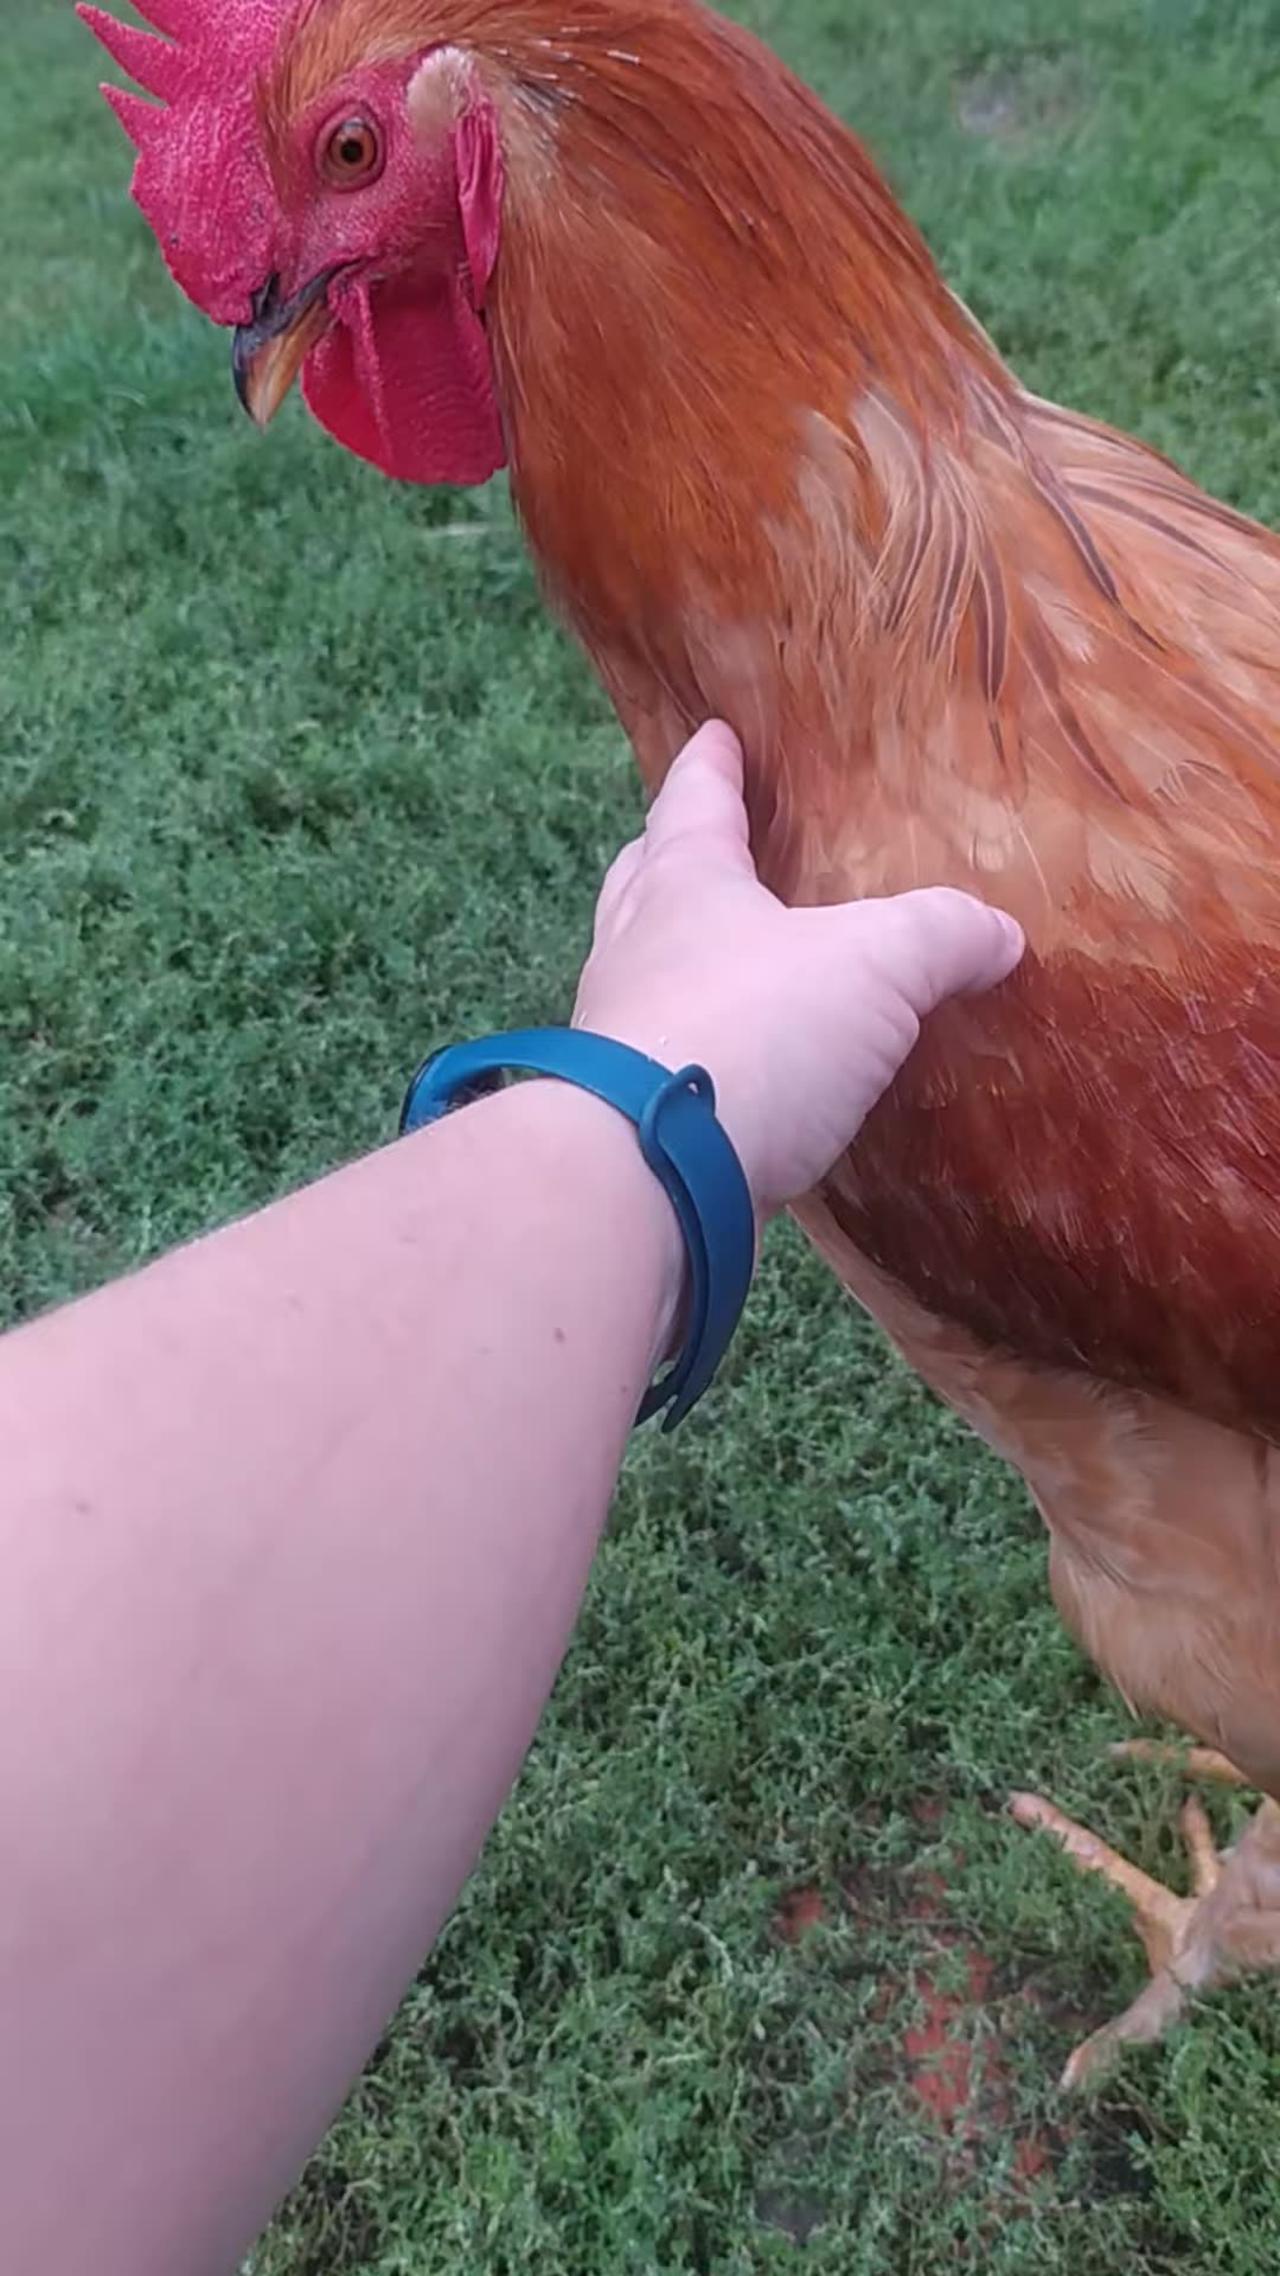 A rooster called Baguette